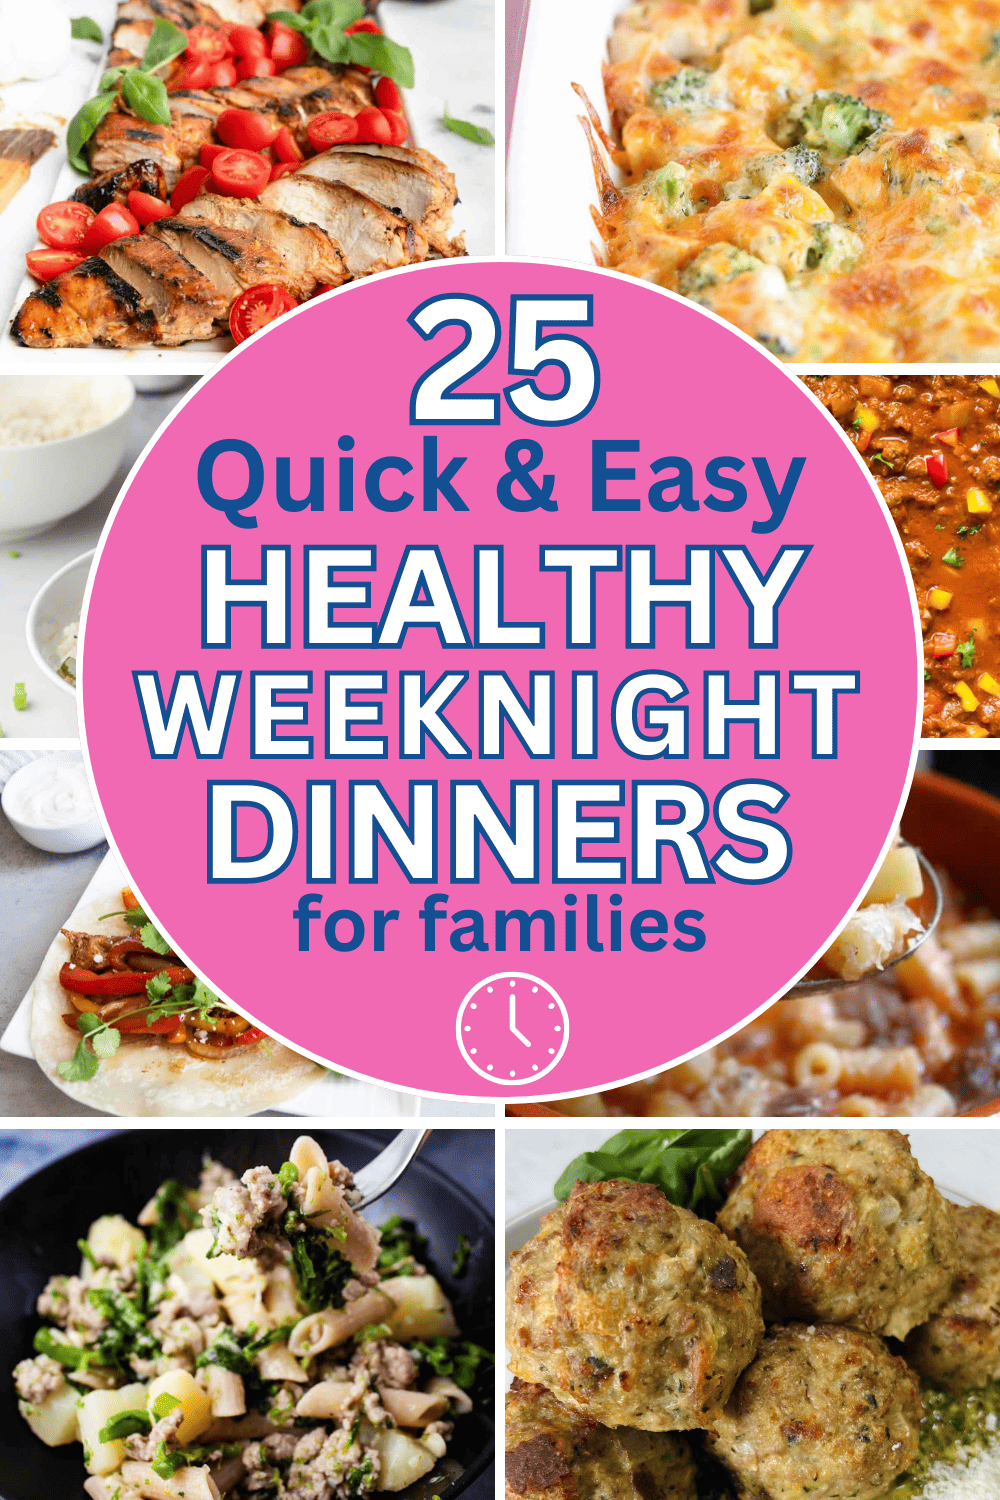 Quick healthy meals for dinner! Easy healthy weeknight meals for families on a budget. Weeknight dinner easy families healthy, easy healthy meals for picky eaters weeknight dinners, easy family dinner ideas healthy, quick and easy dinner recipes healthy, easy healthy meals for dinner families, easy healthy family meals weeknight dinners, easy weeknight meals healthy slow cooker, easy healthy dinner recipes for family budget inexpensive meals, quick meals for dinner healthy simple easy recipes.